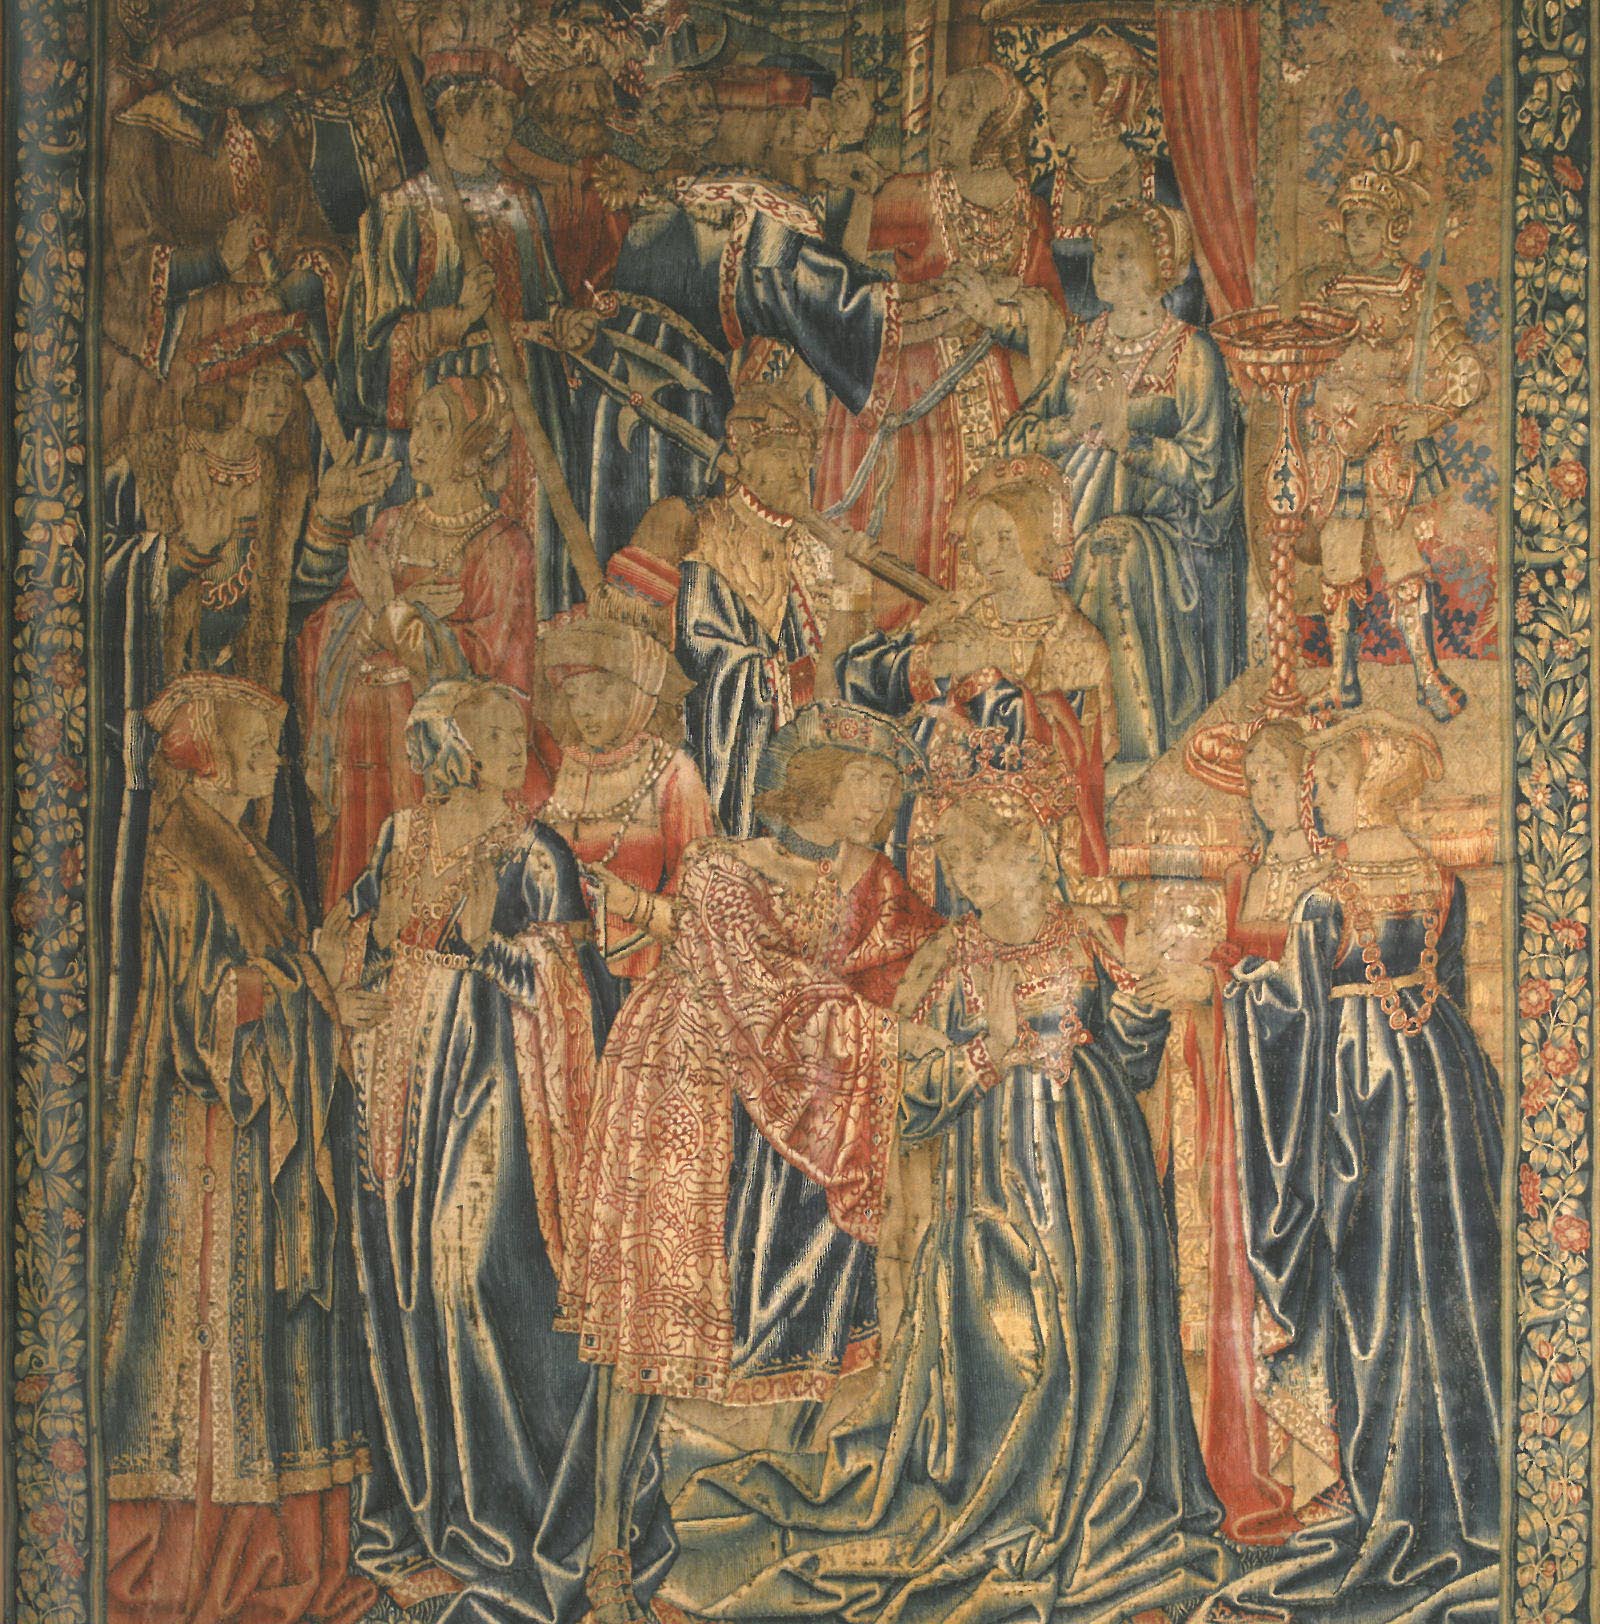 Detail of a 16th century Tournai Tapesty in the Tapestry Room. Image courtesy of Penshurst Place.